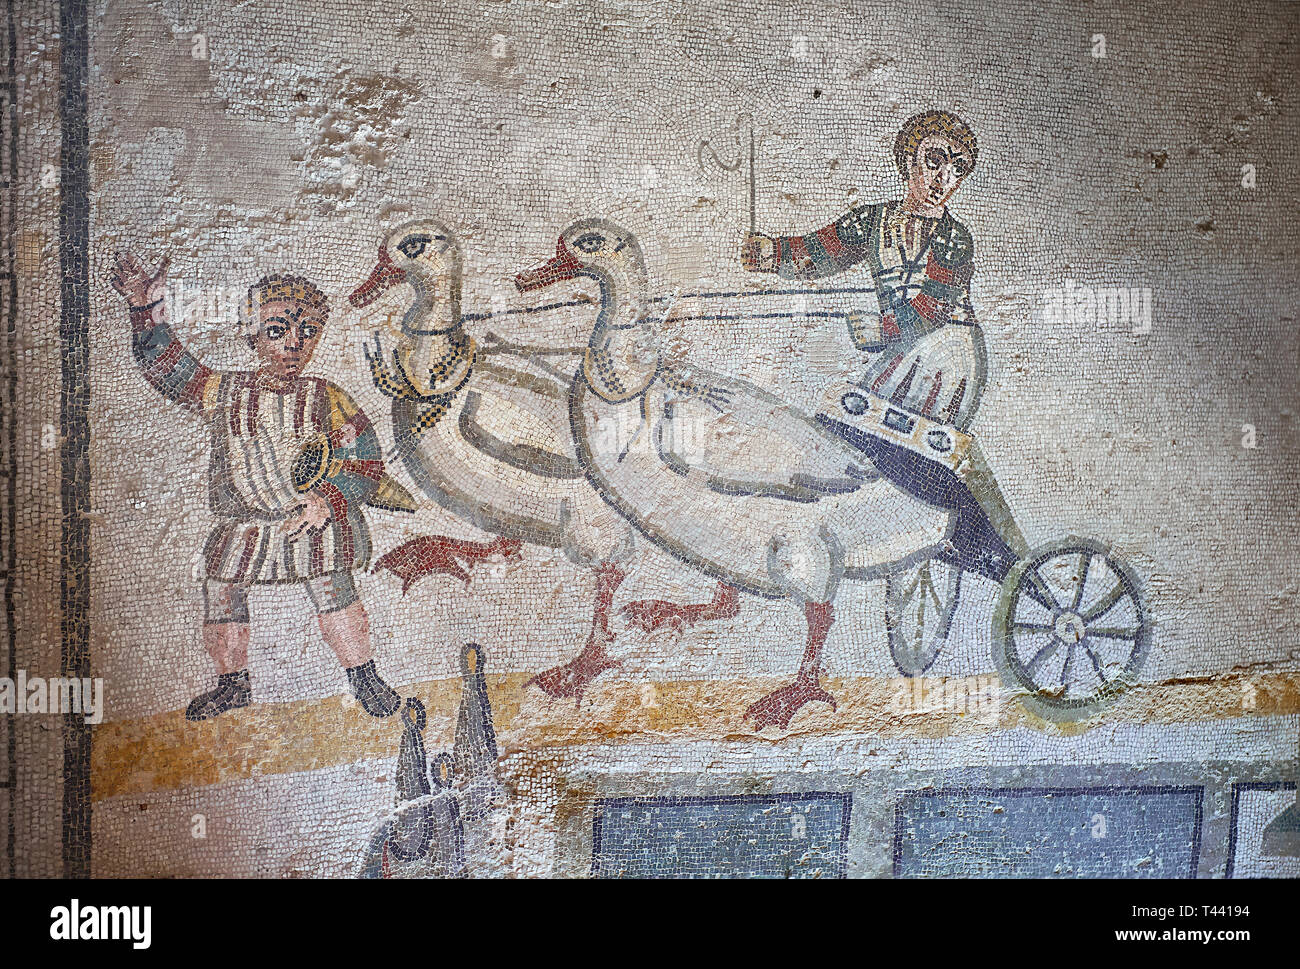 Close up picture of the Roman mosaics of the room of the Small Circus depicting Roman boys riding small chariots pulled by geese in a small circus, Th Stock Photo